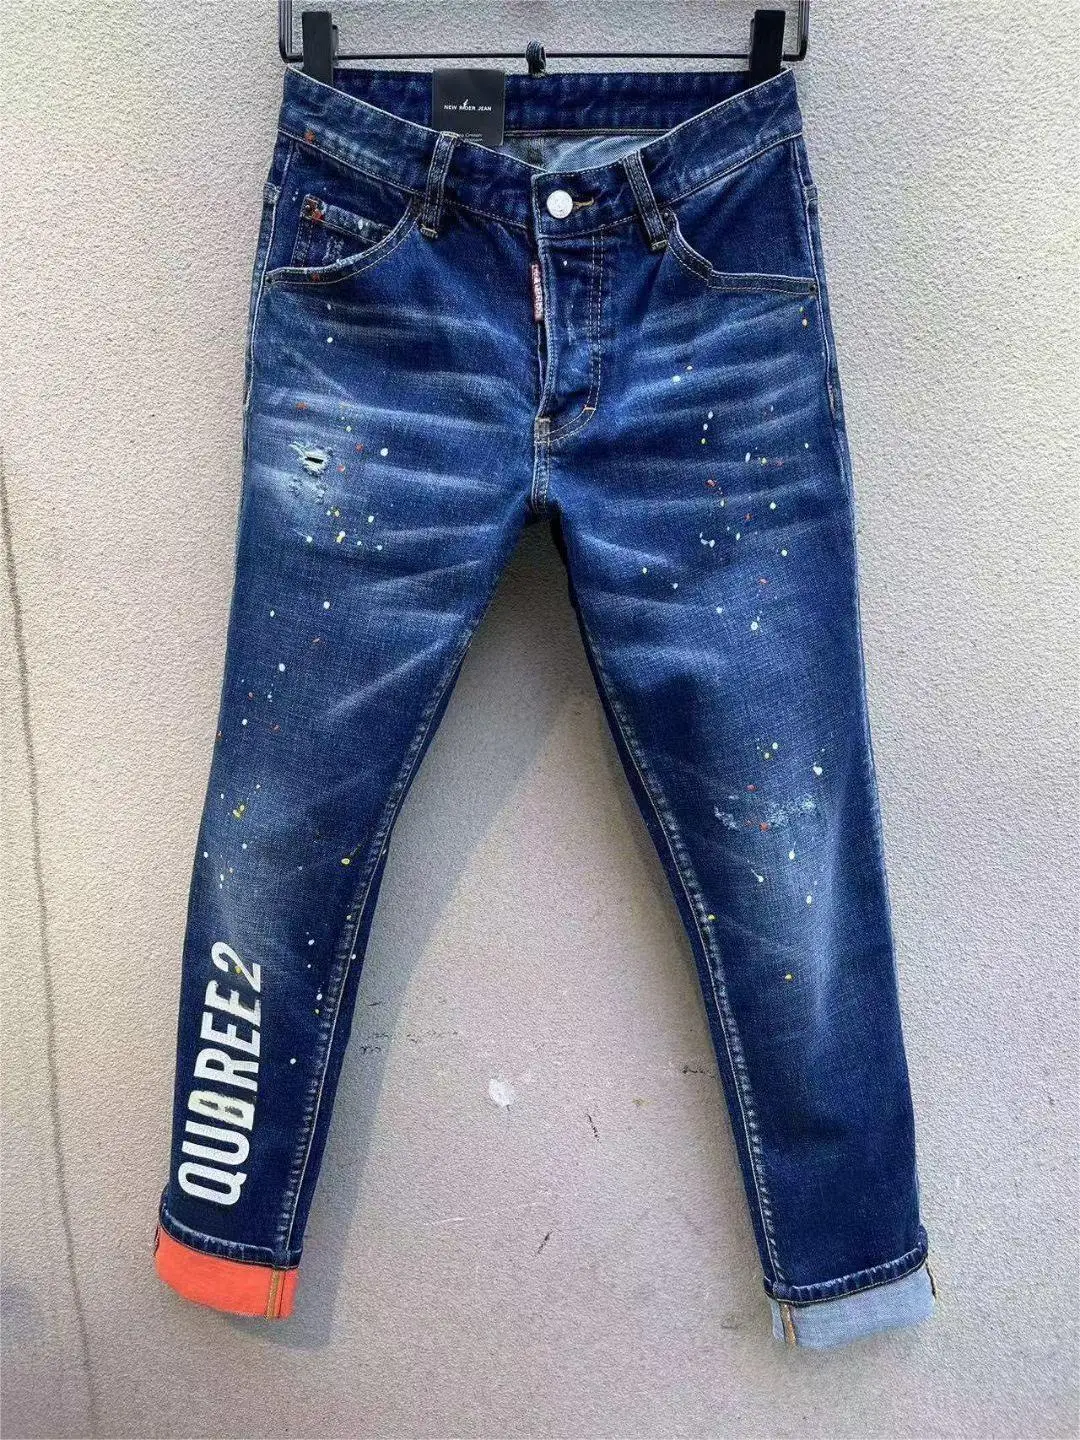 

2023 new fashion tide brand men's washing worn out torn paint locomotive jeans 108